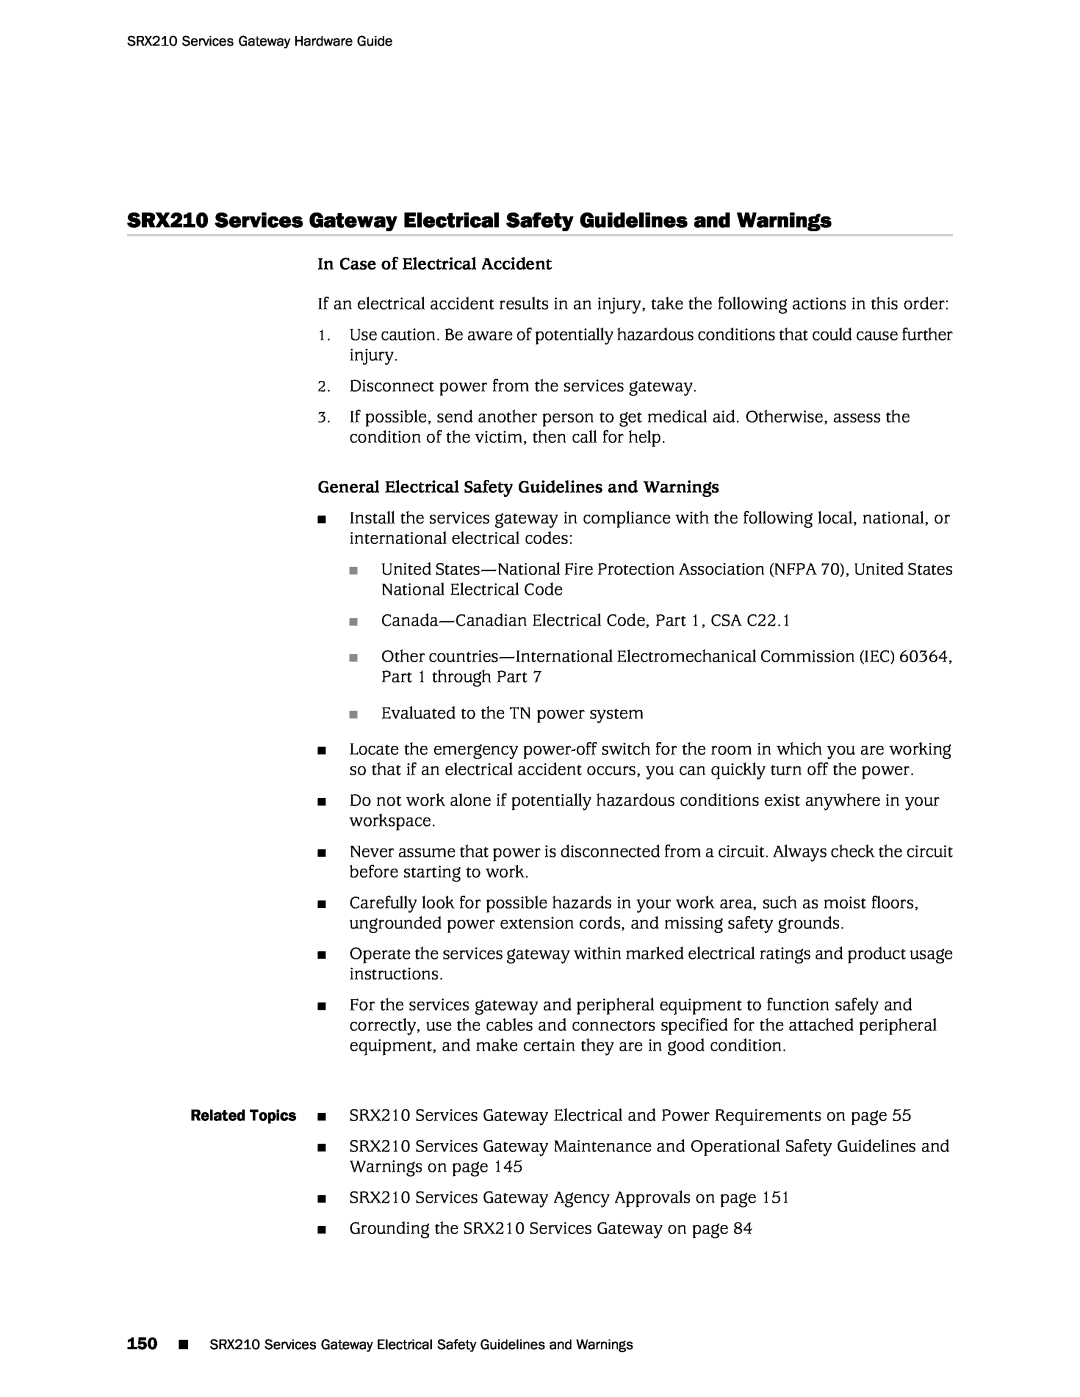 Juniper Networks SRX 210 SRX210 Services Gateway Electrical Safety Guidelines and Warnings, In Case of Electrical Accident 